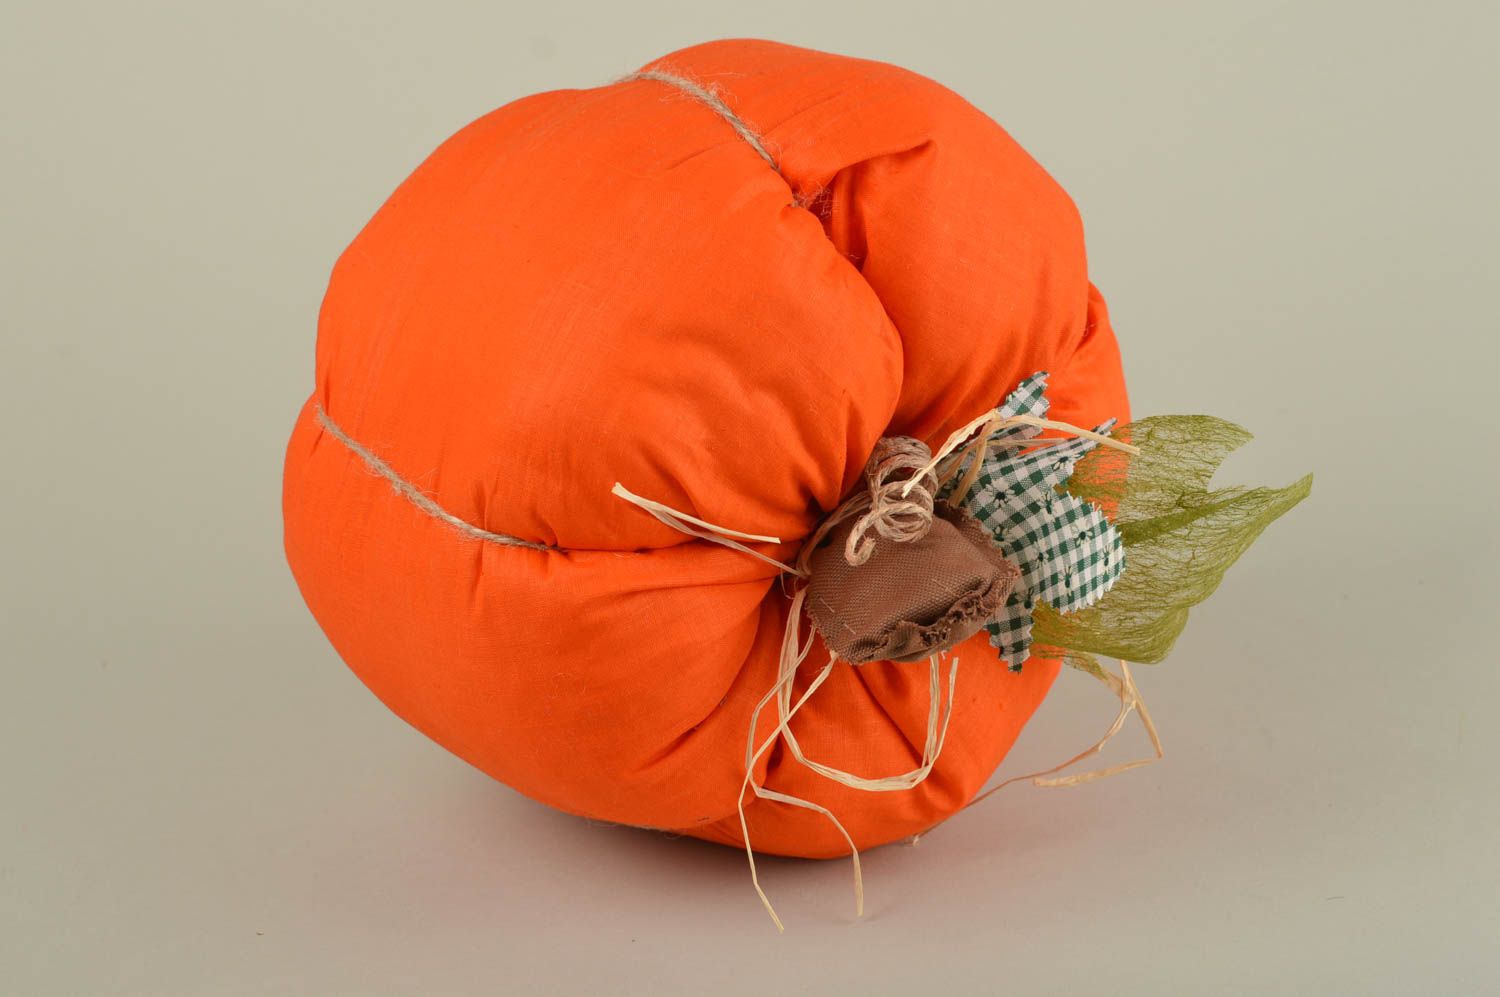 Unusual handmade throw pillow best toys for kids interior decorating ideas photo 4